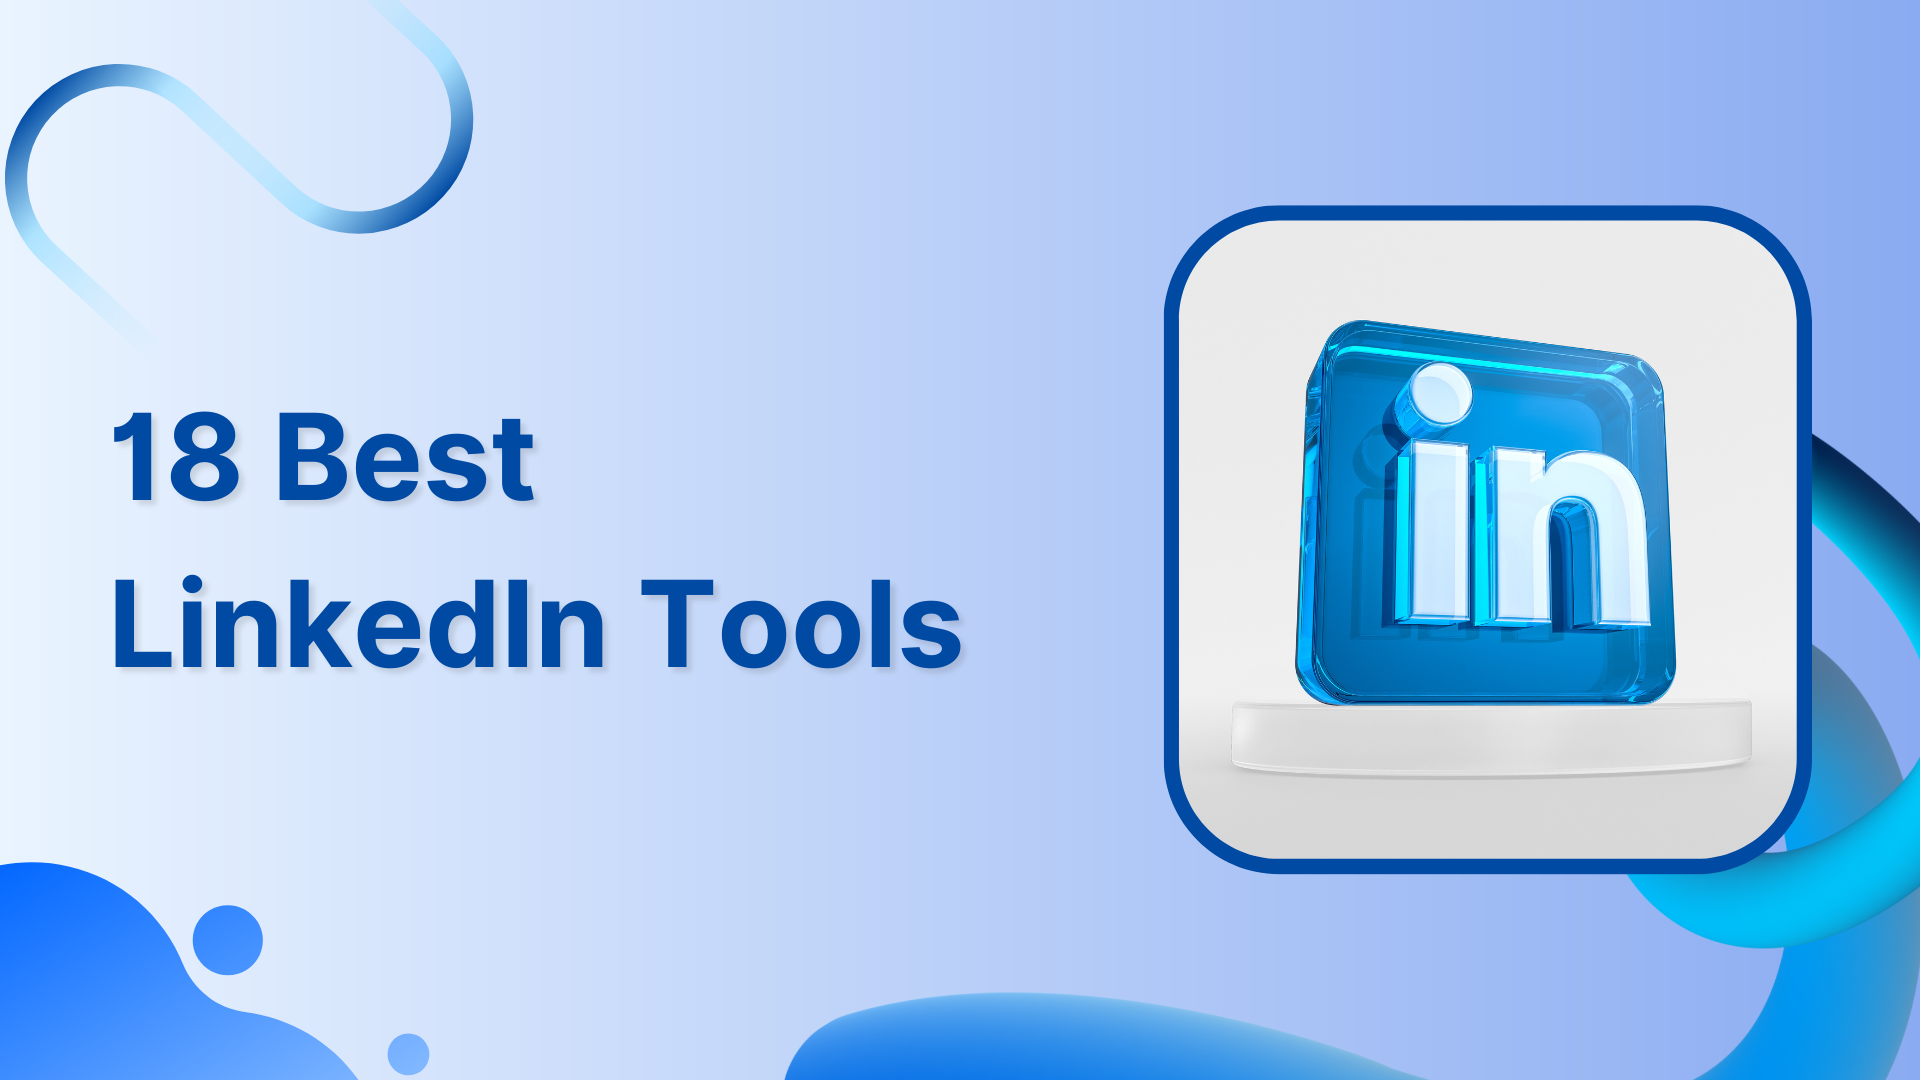 18 Best LinkedIn Tools That Drive Results in 2022